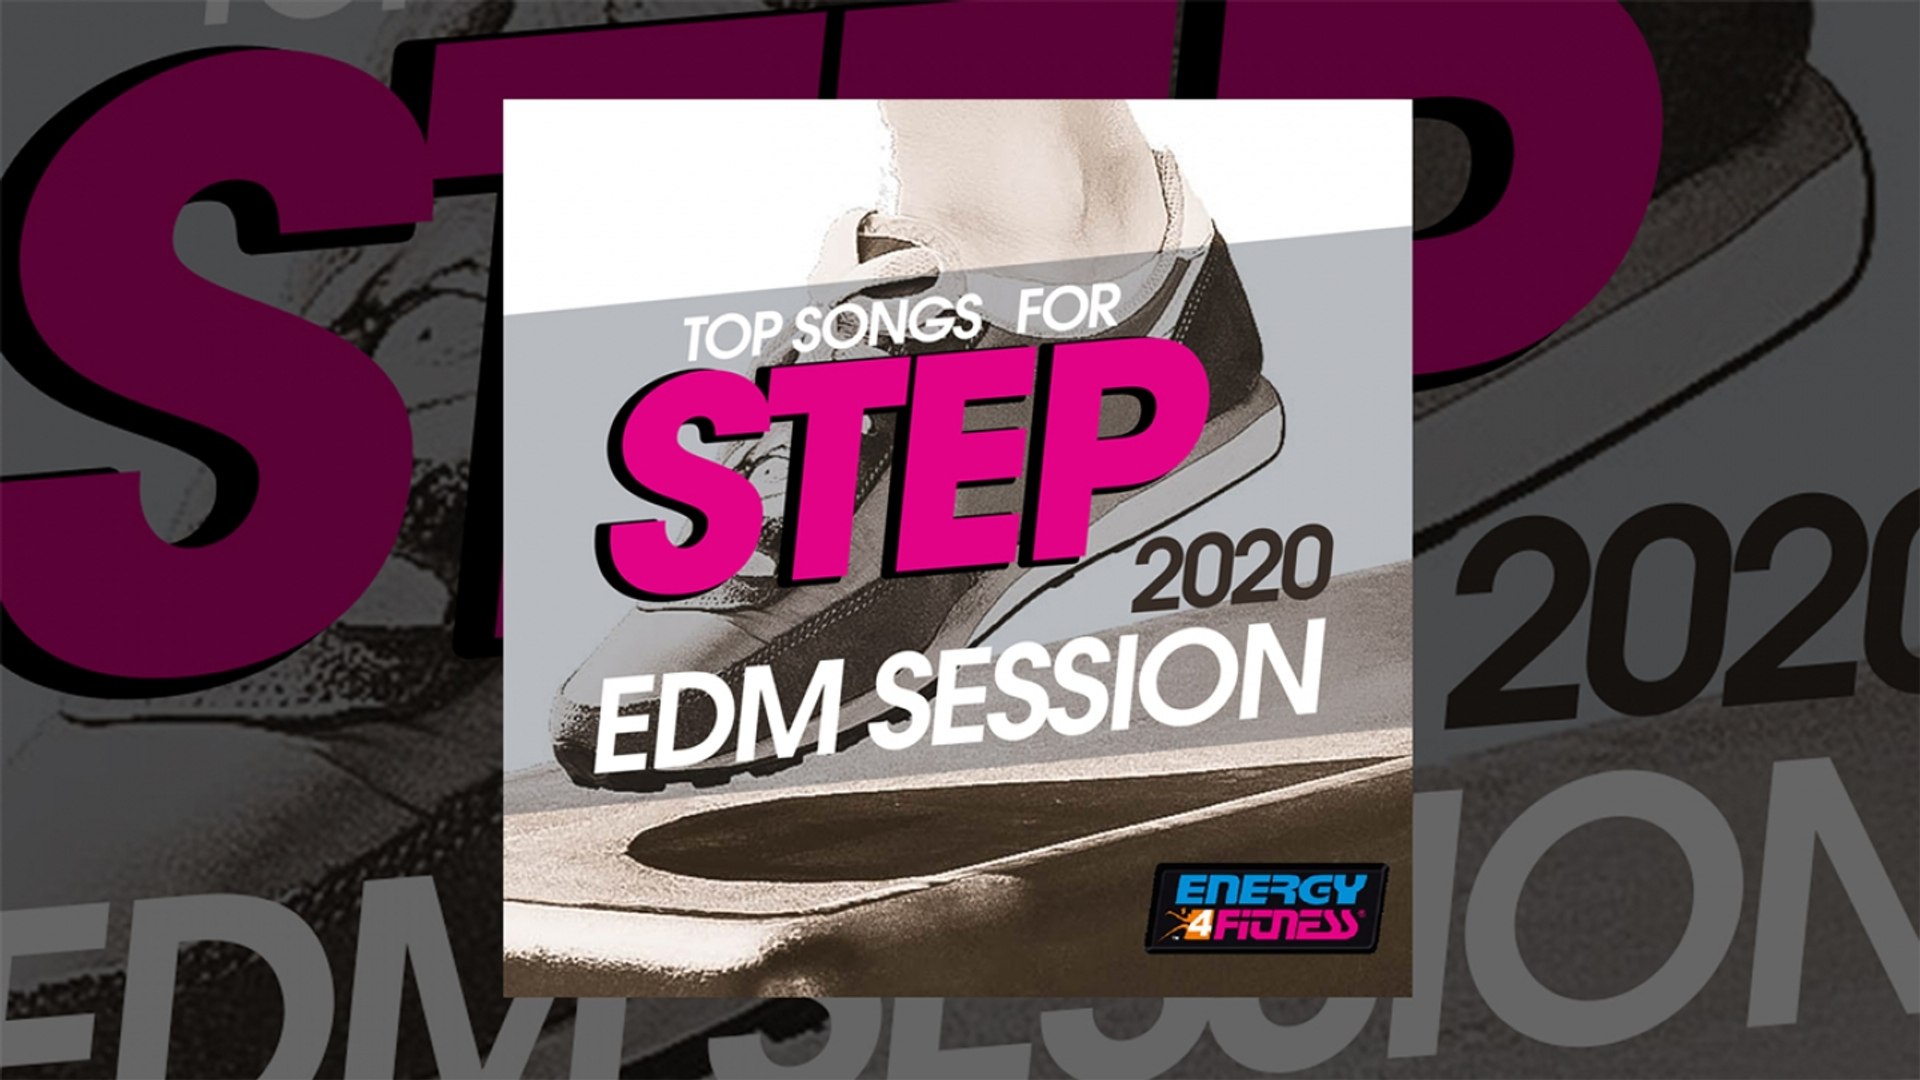 E4F - Top Songs For Step 2020 EDM Session - Fitness & Music 2020